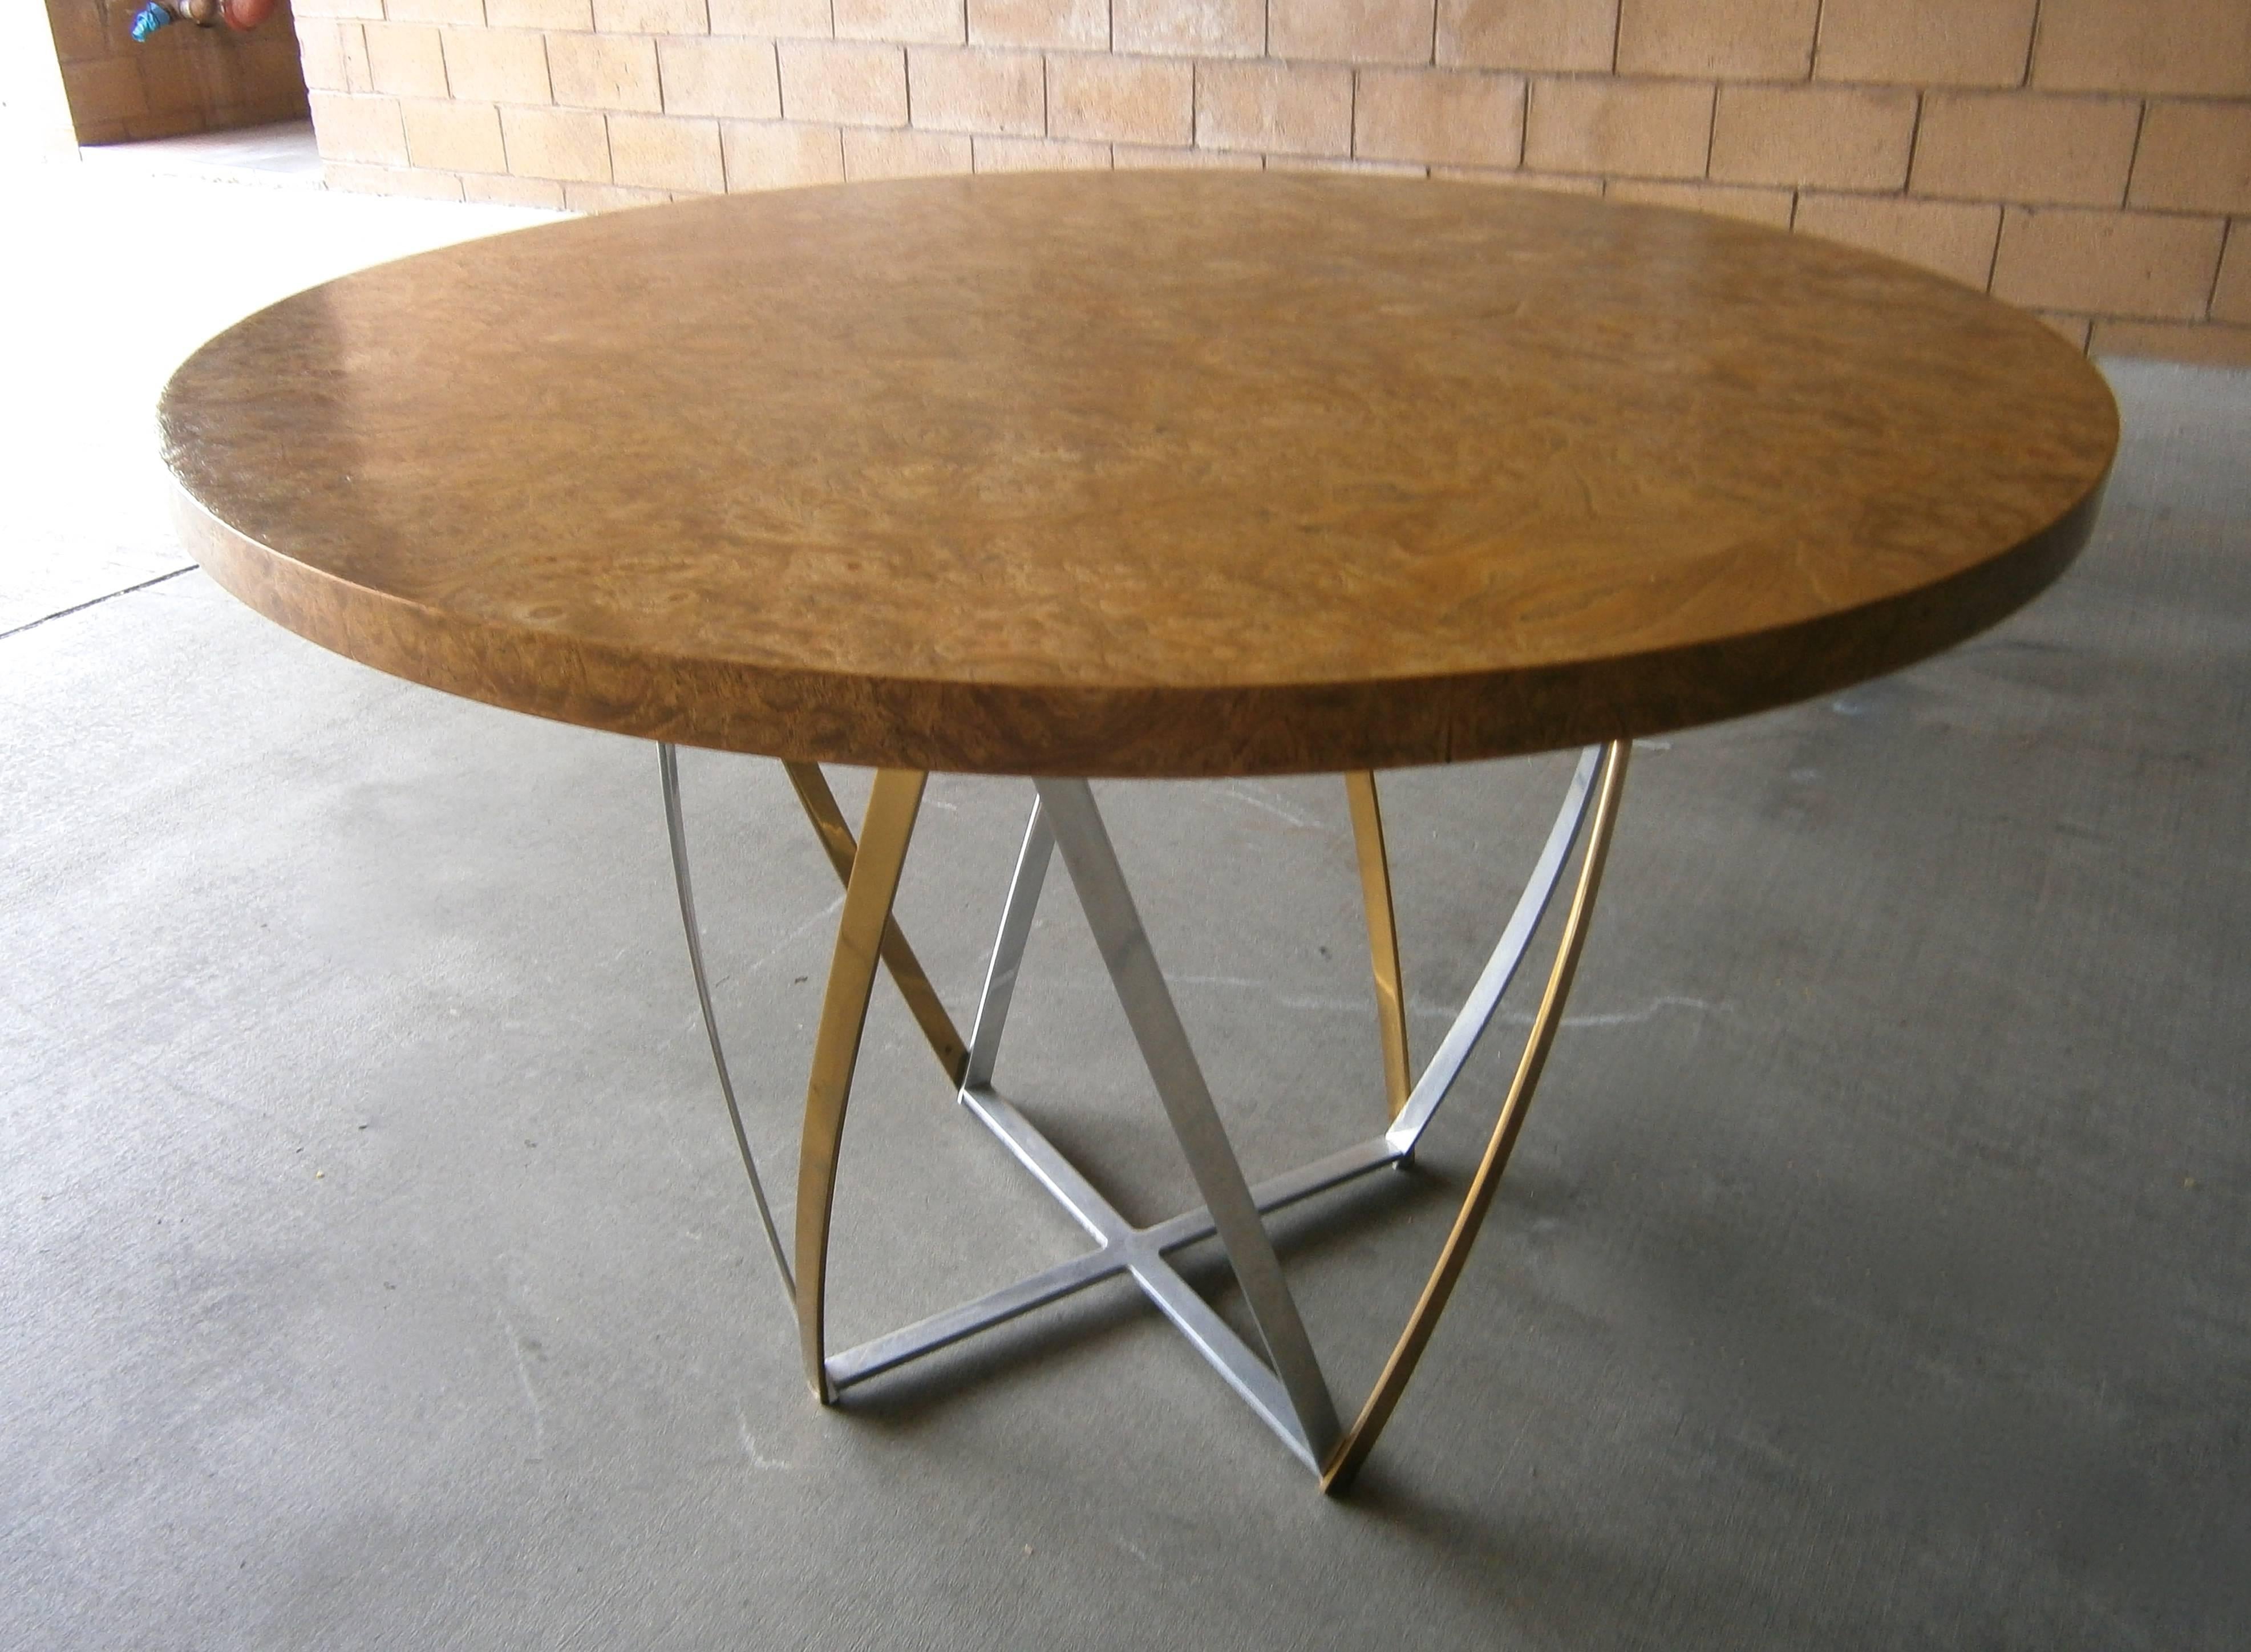 Aluminum and Brass Based Burled wood Circular Table by John Vesey  C. 1960s For Sale 1